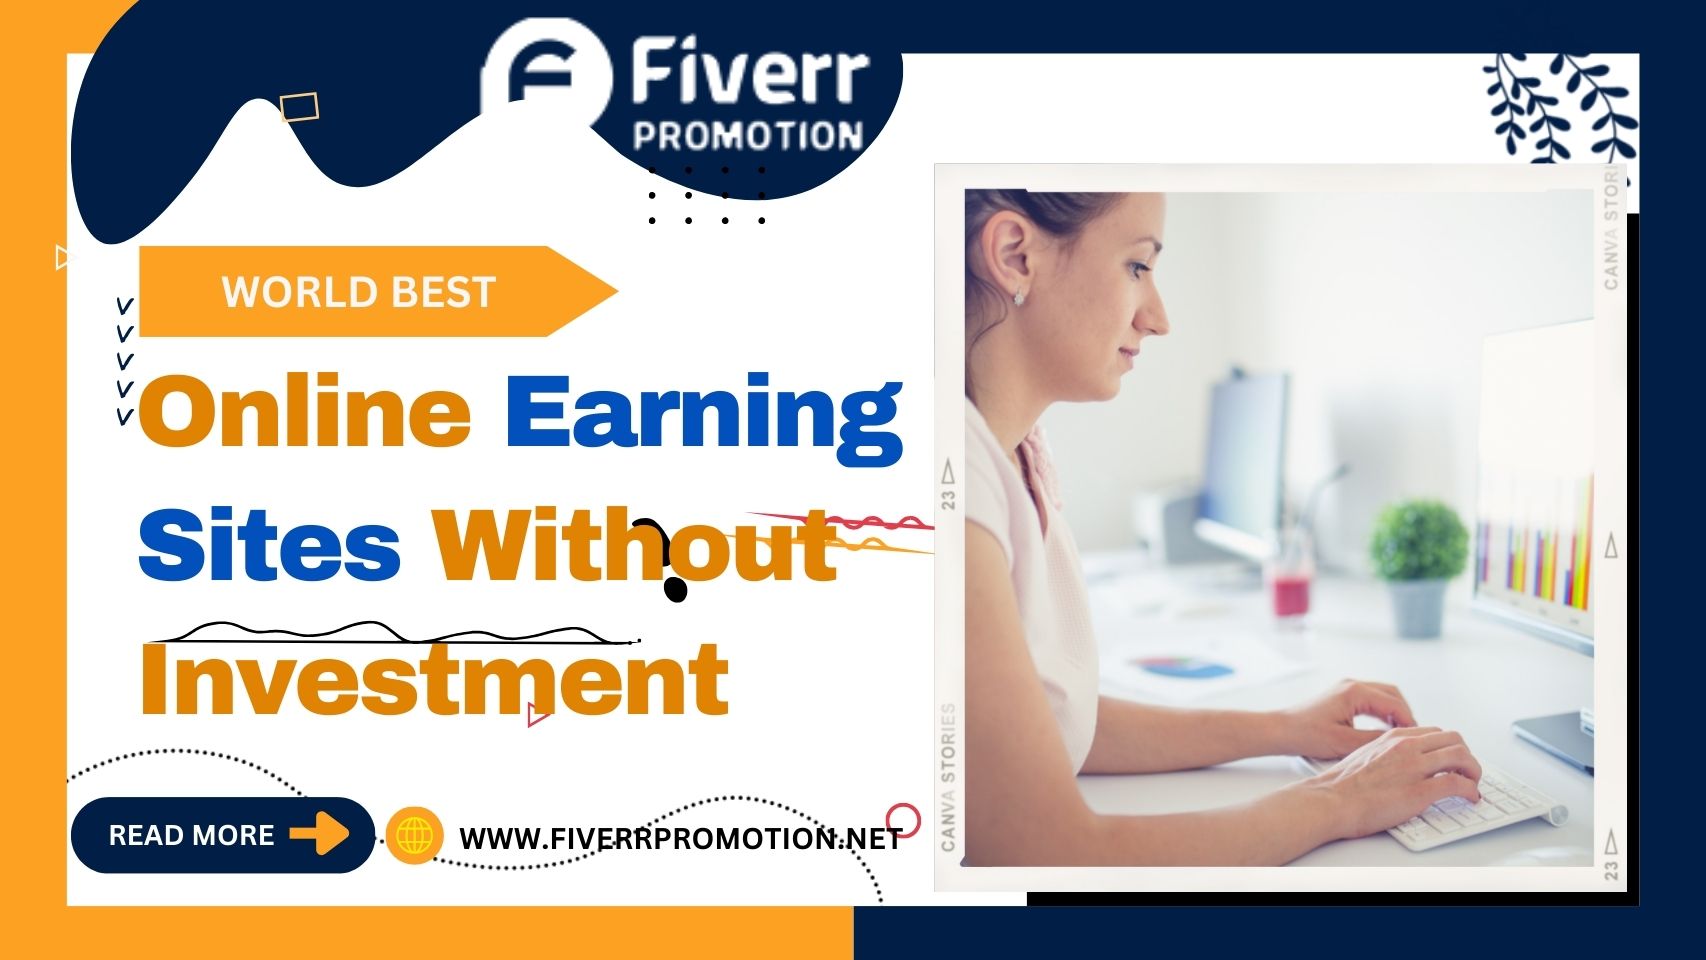 World Best Online Earning Sites Without Investment